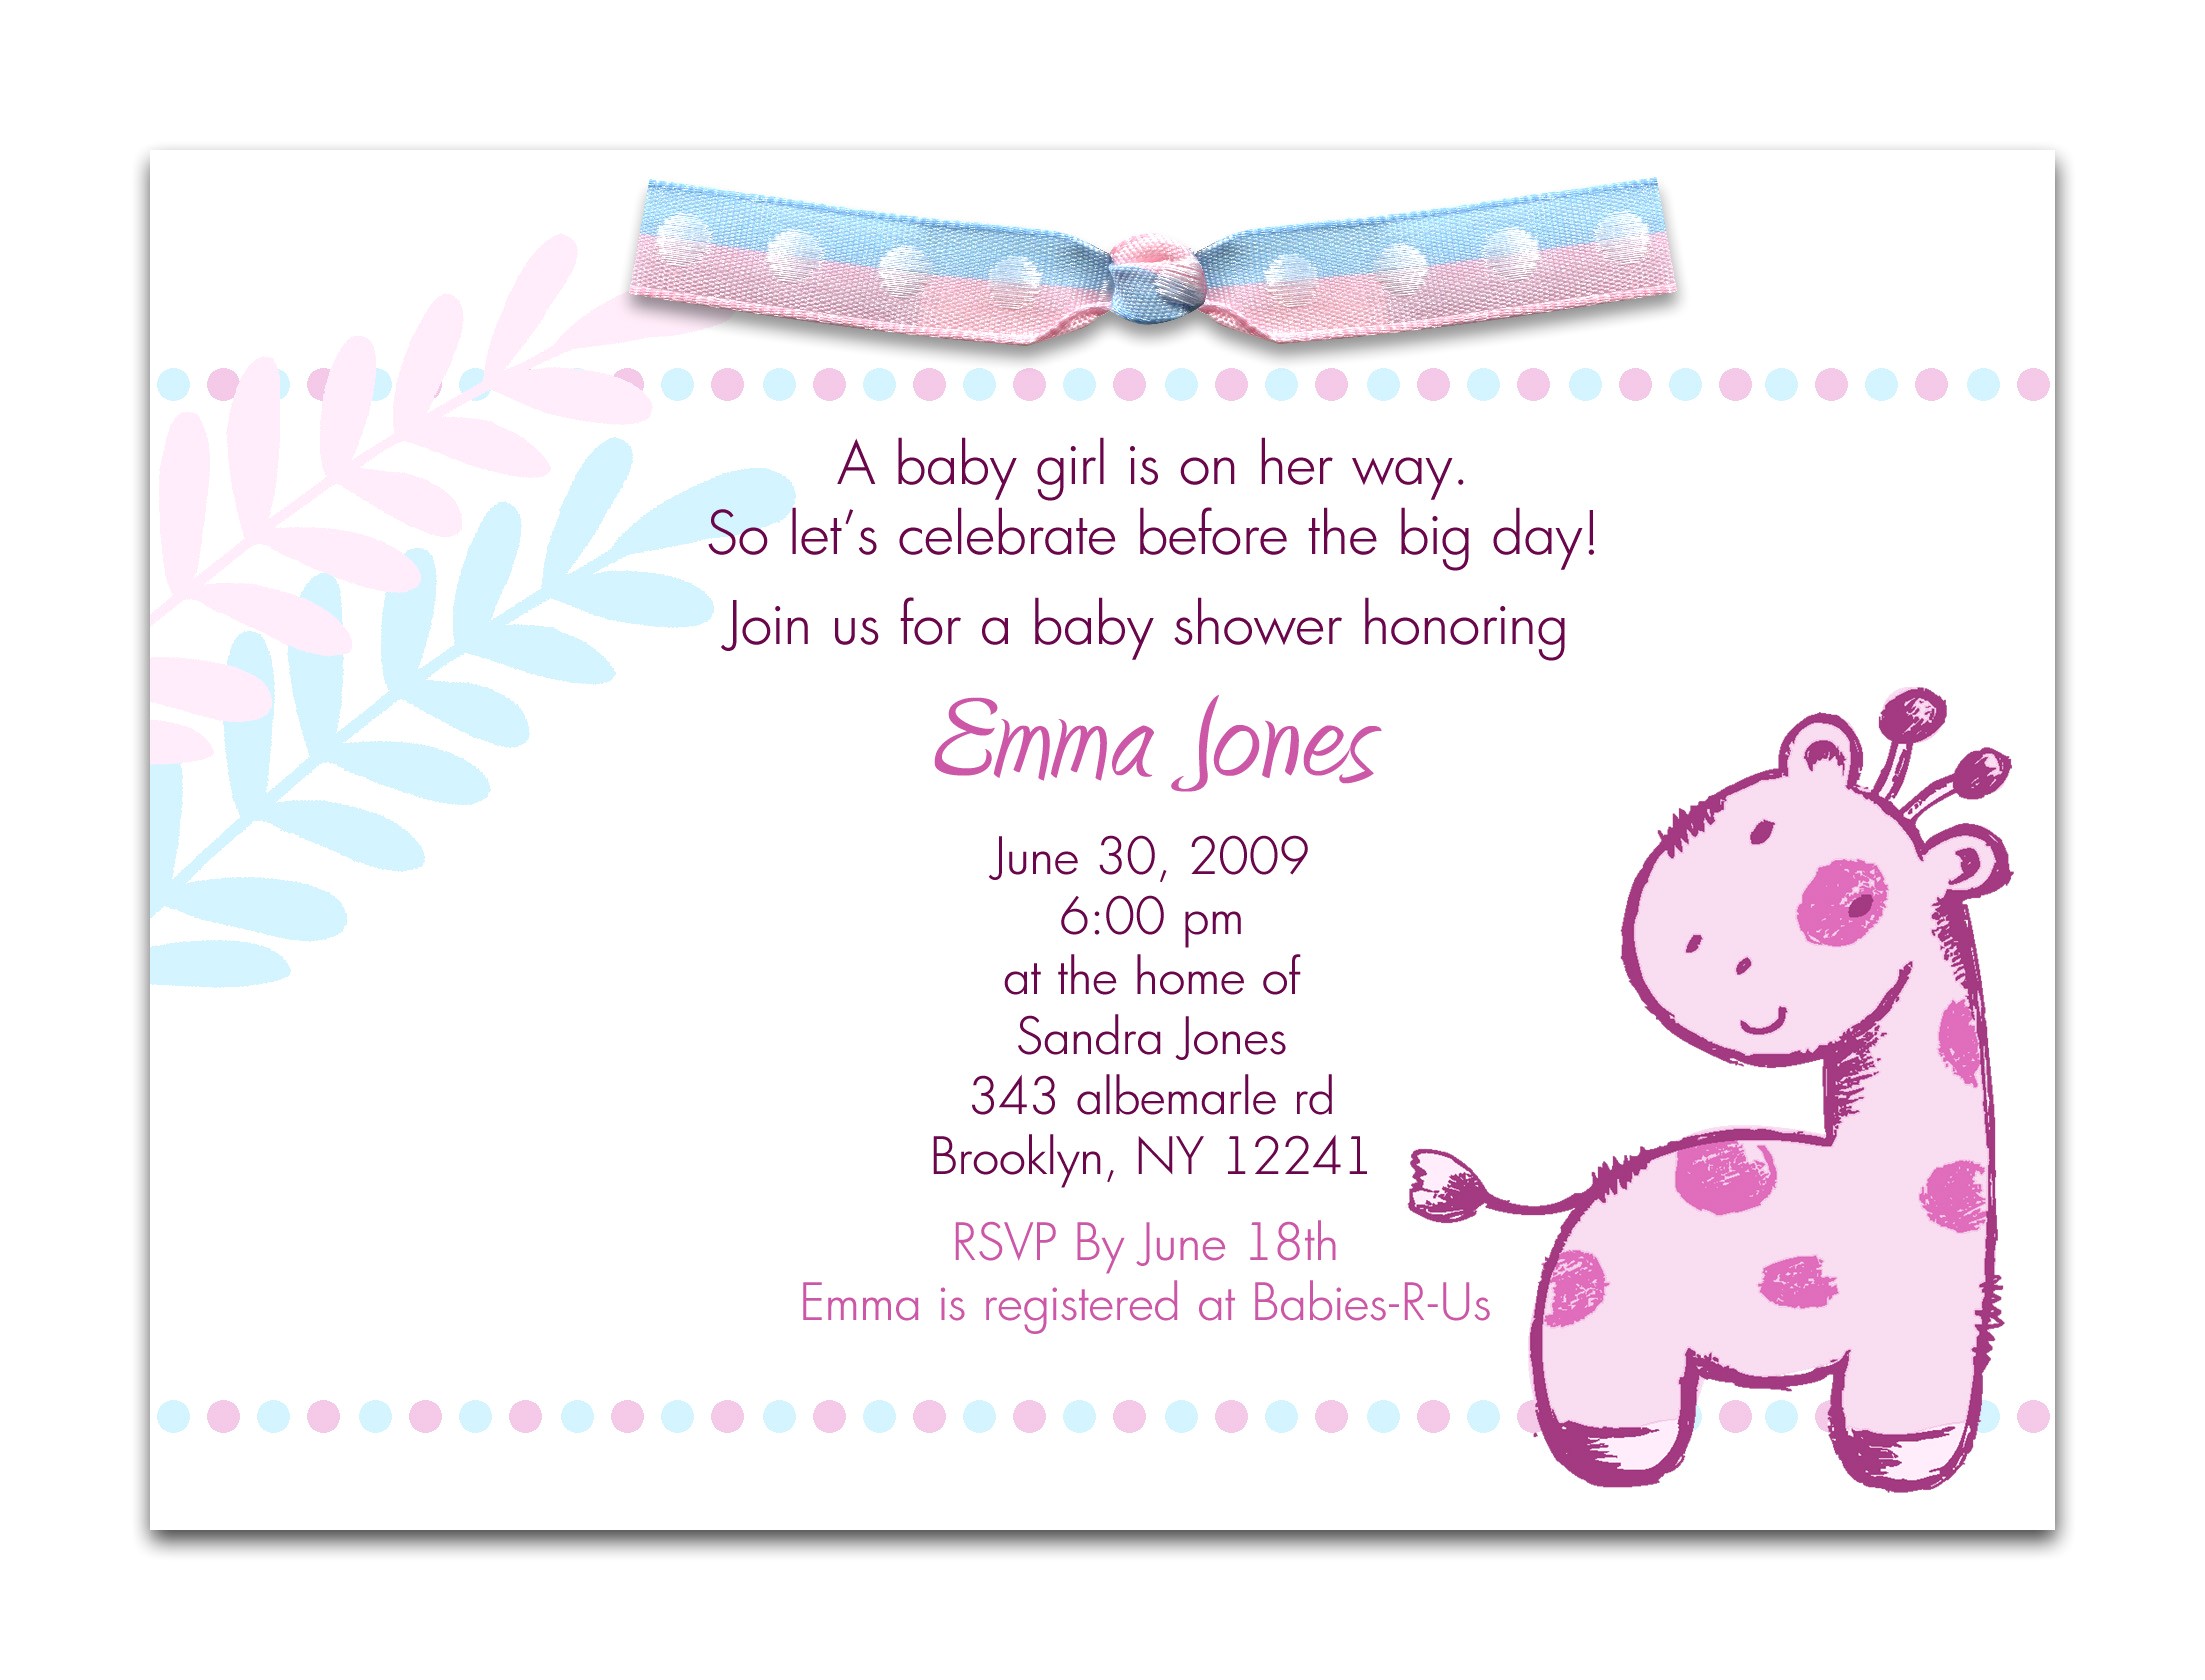 text for baby shower invite